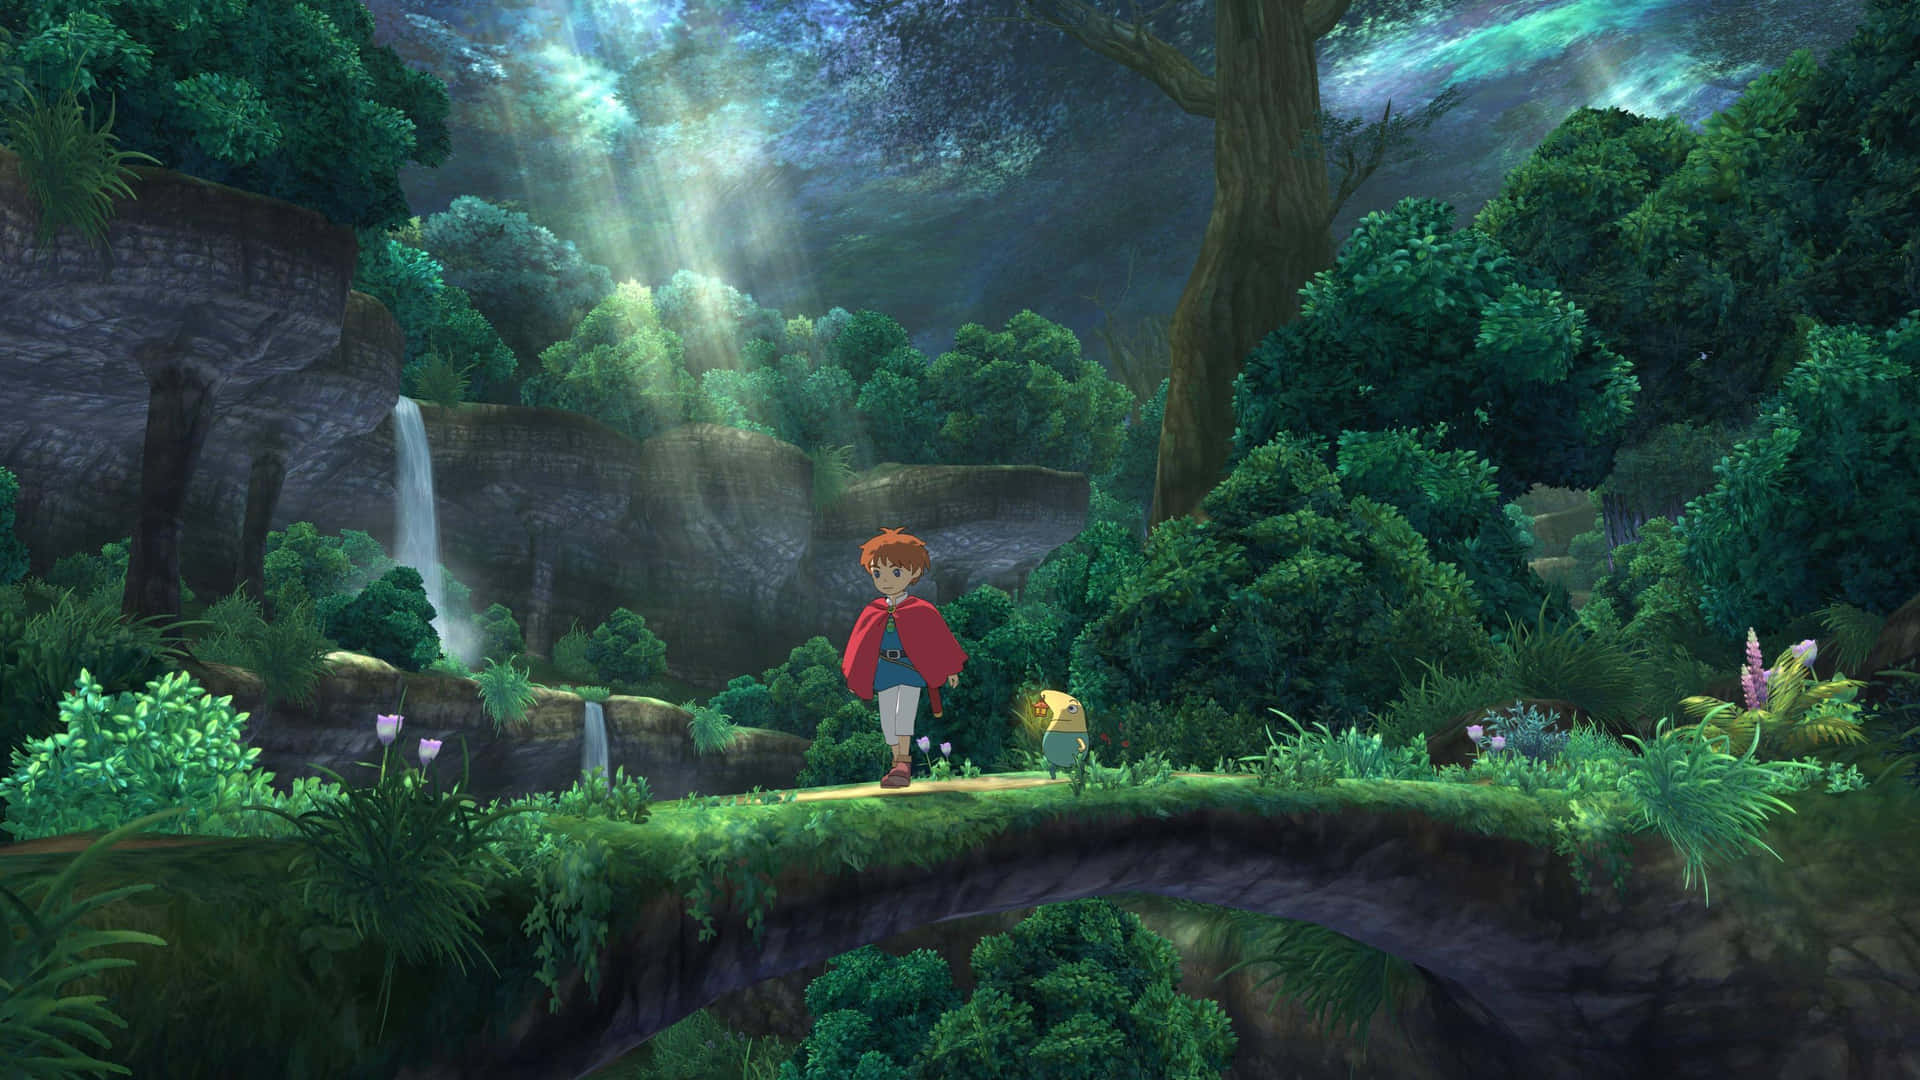 Aesthetic Green Ni No Kuni Pictures 2900 x 1632 Picture